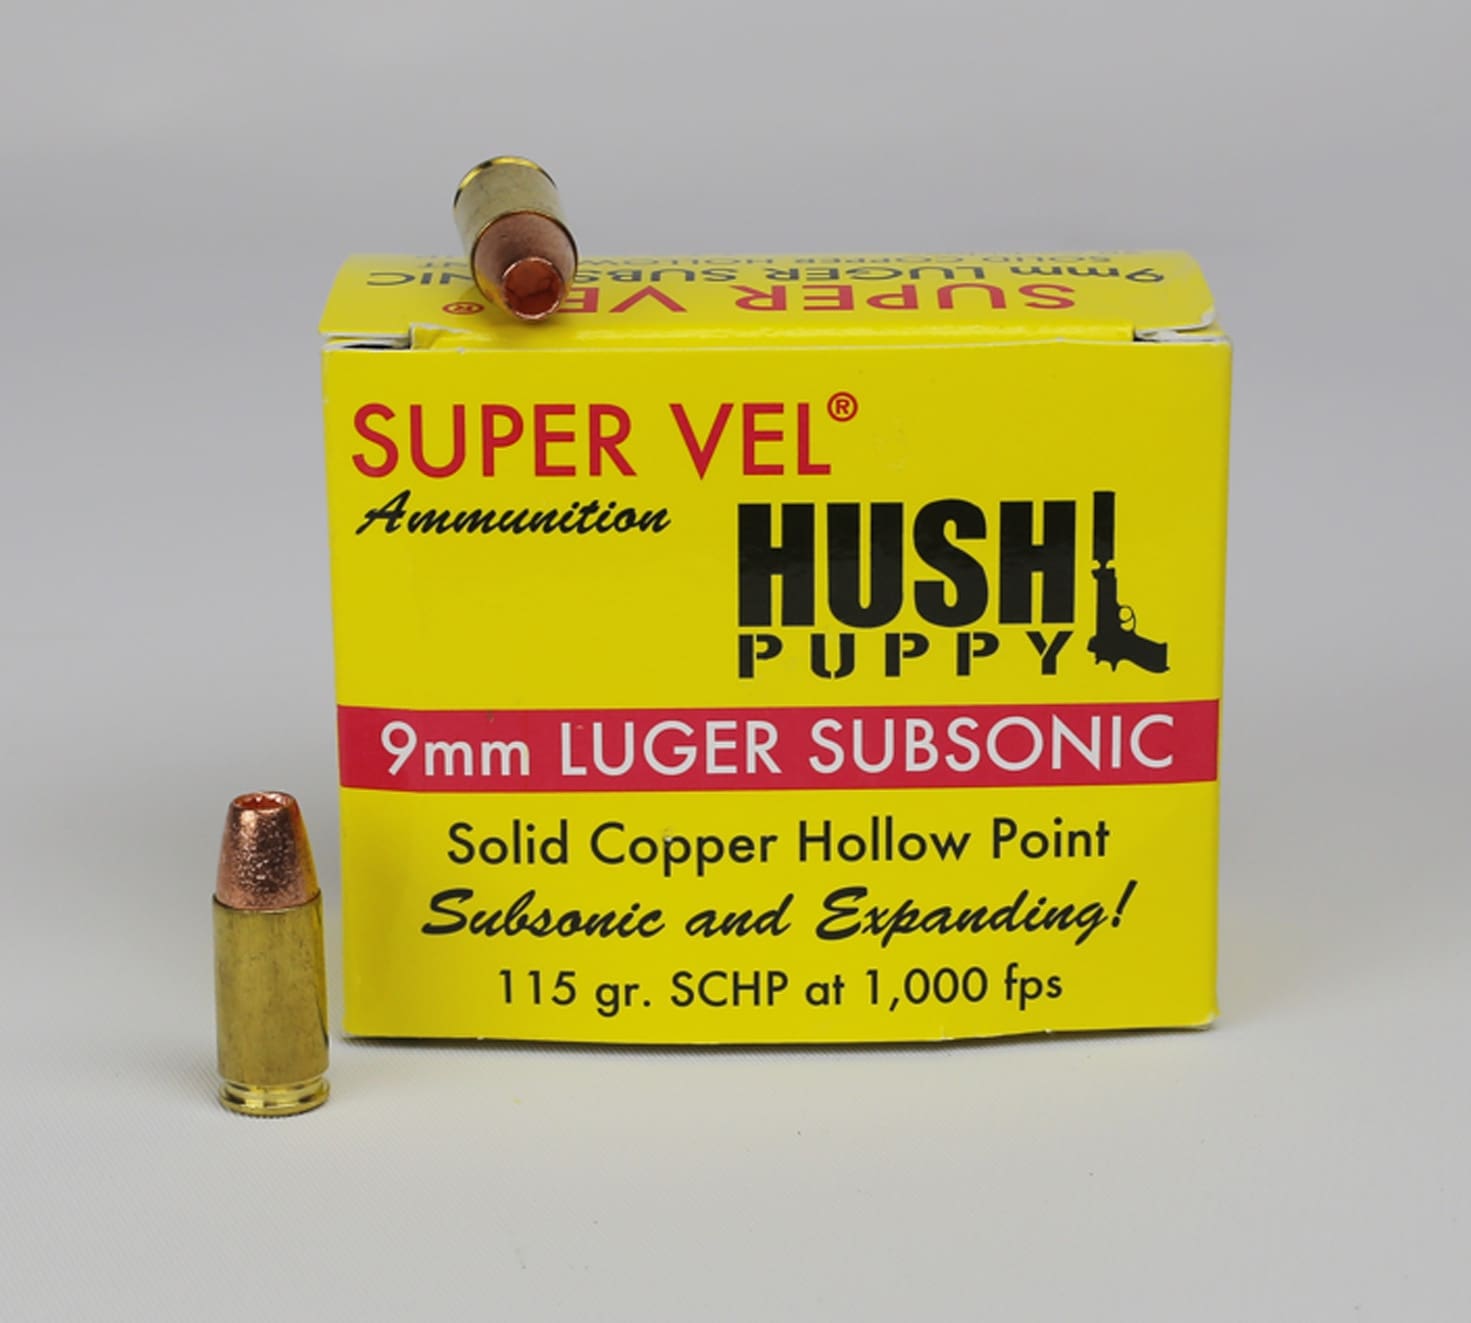 Hush Puppy Project Brings Back Hush Puppy Pistols Silencers And Ammunition Soldier Systems Daily